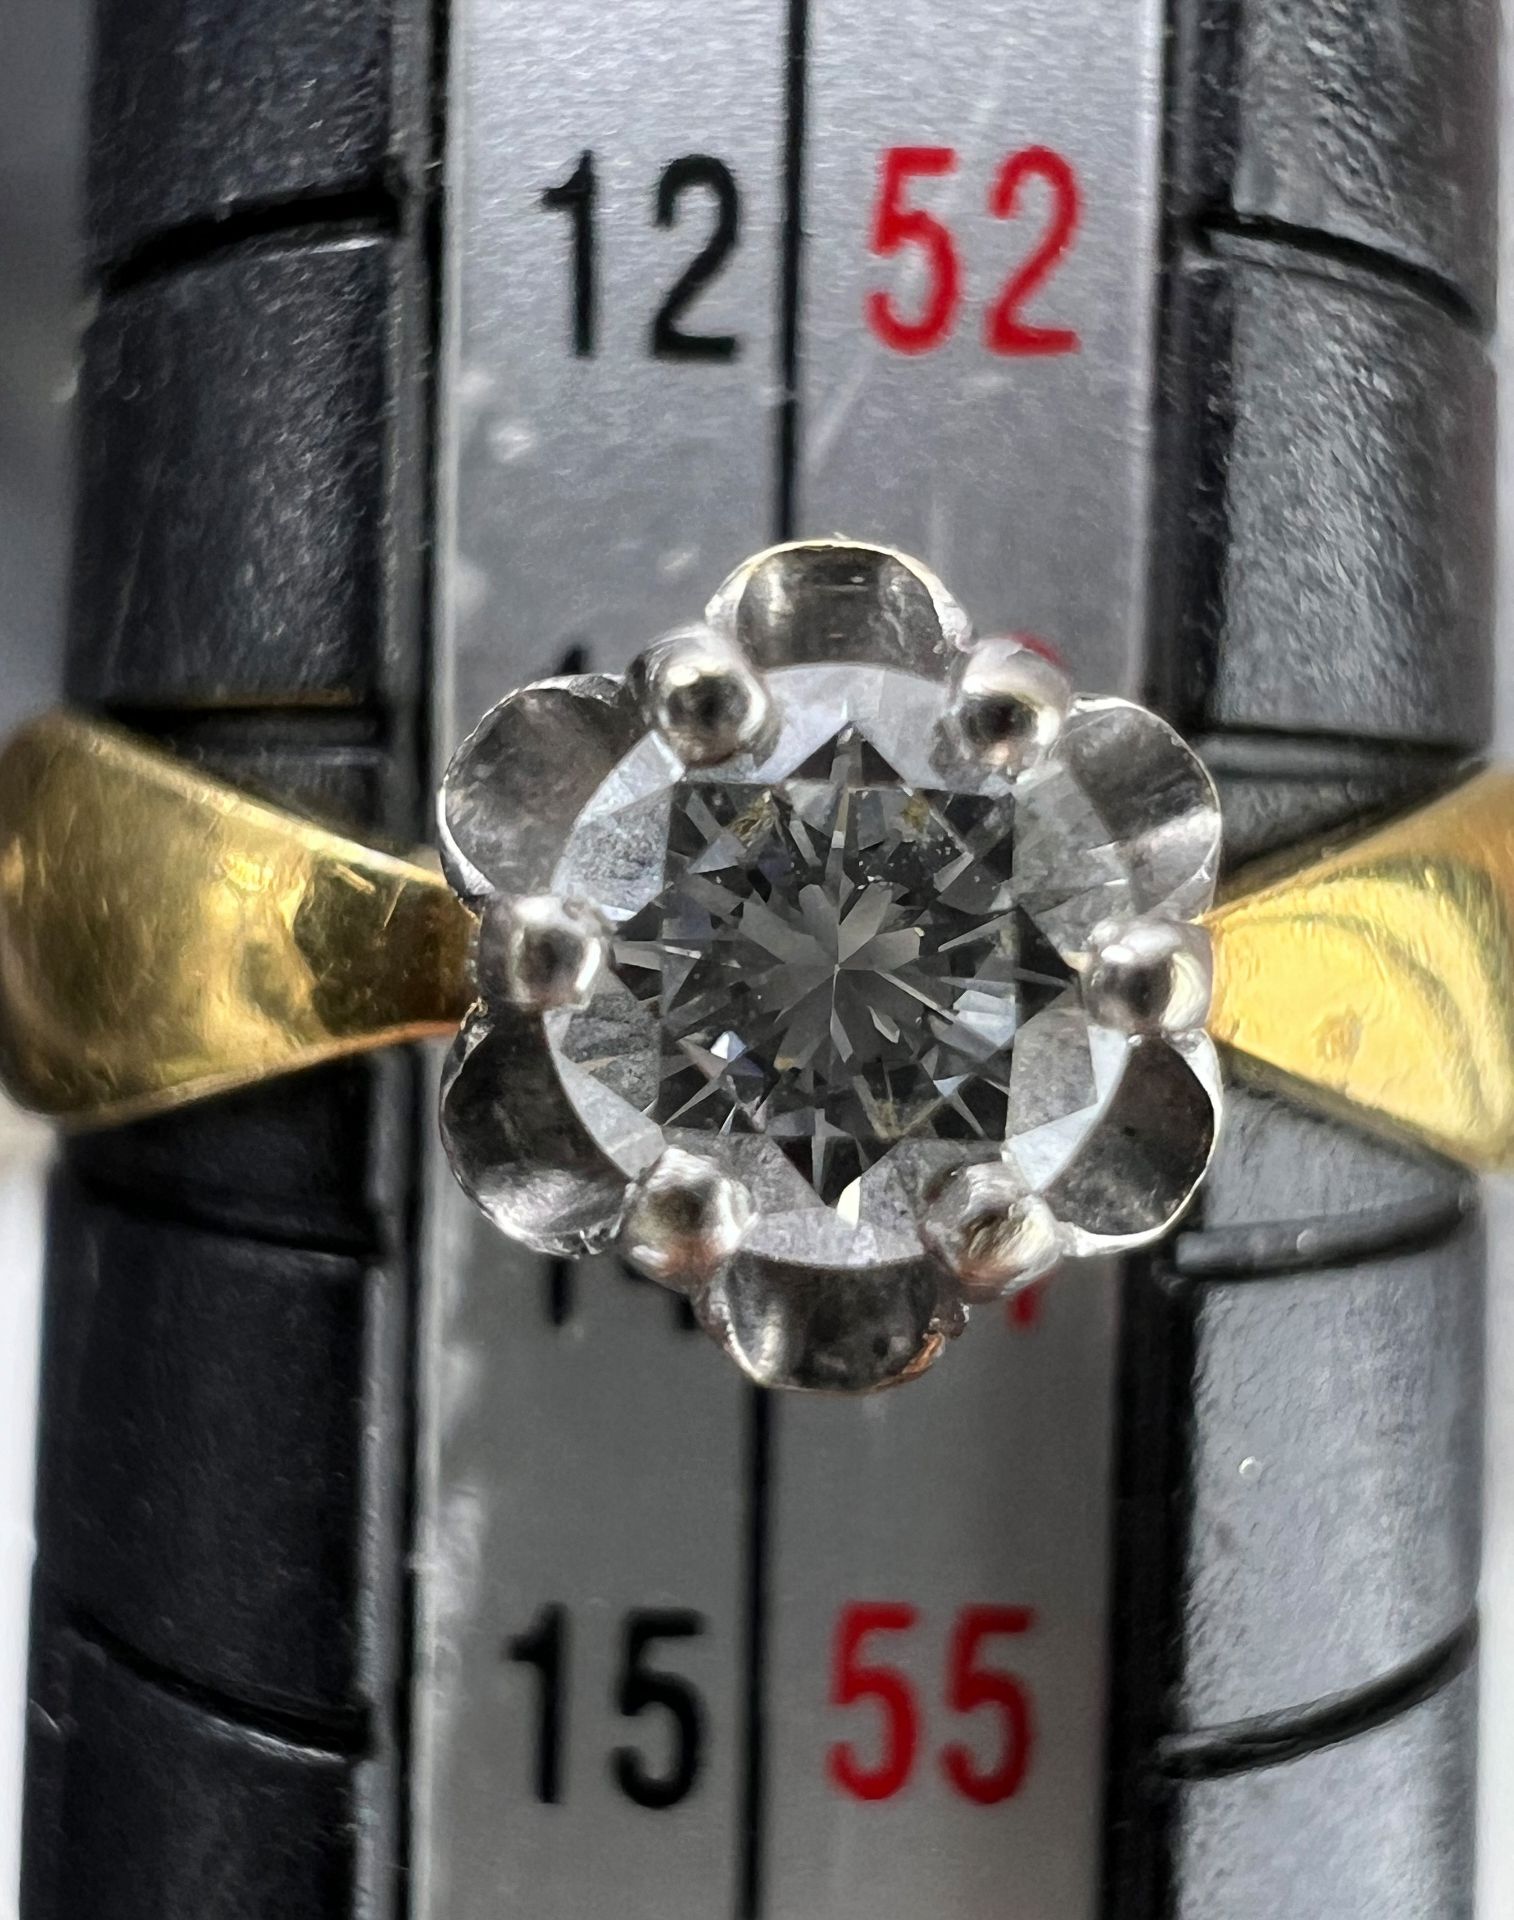 Solitaire ring. 900 yellow gold. 1 diamond of approx. 0.17-0.20 ct. - Image 6 of 8